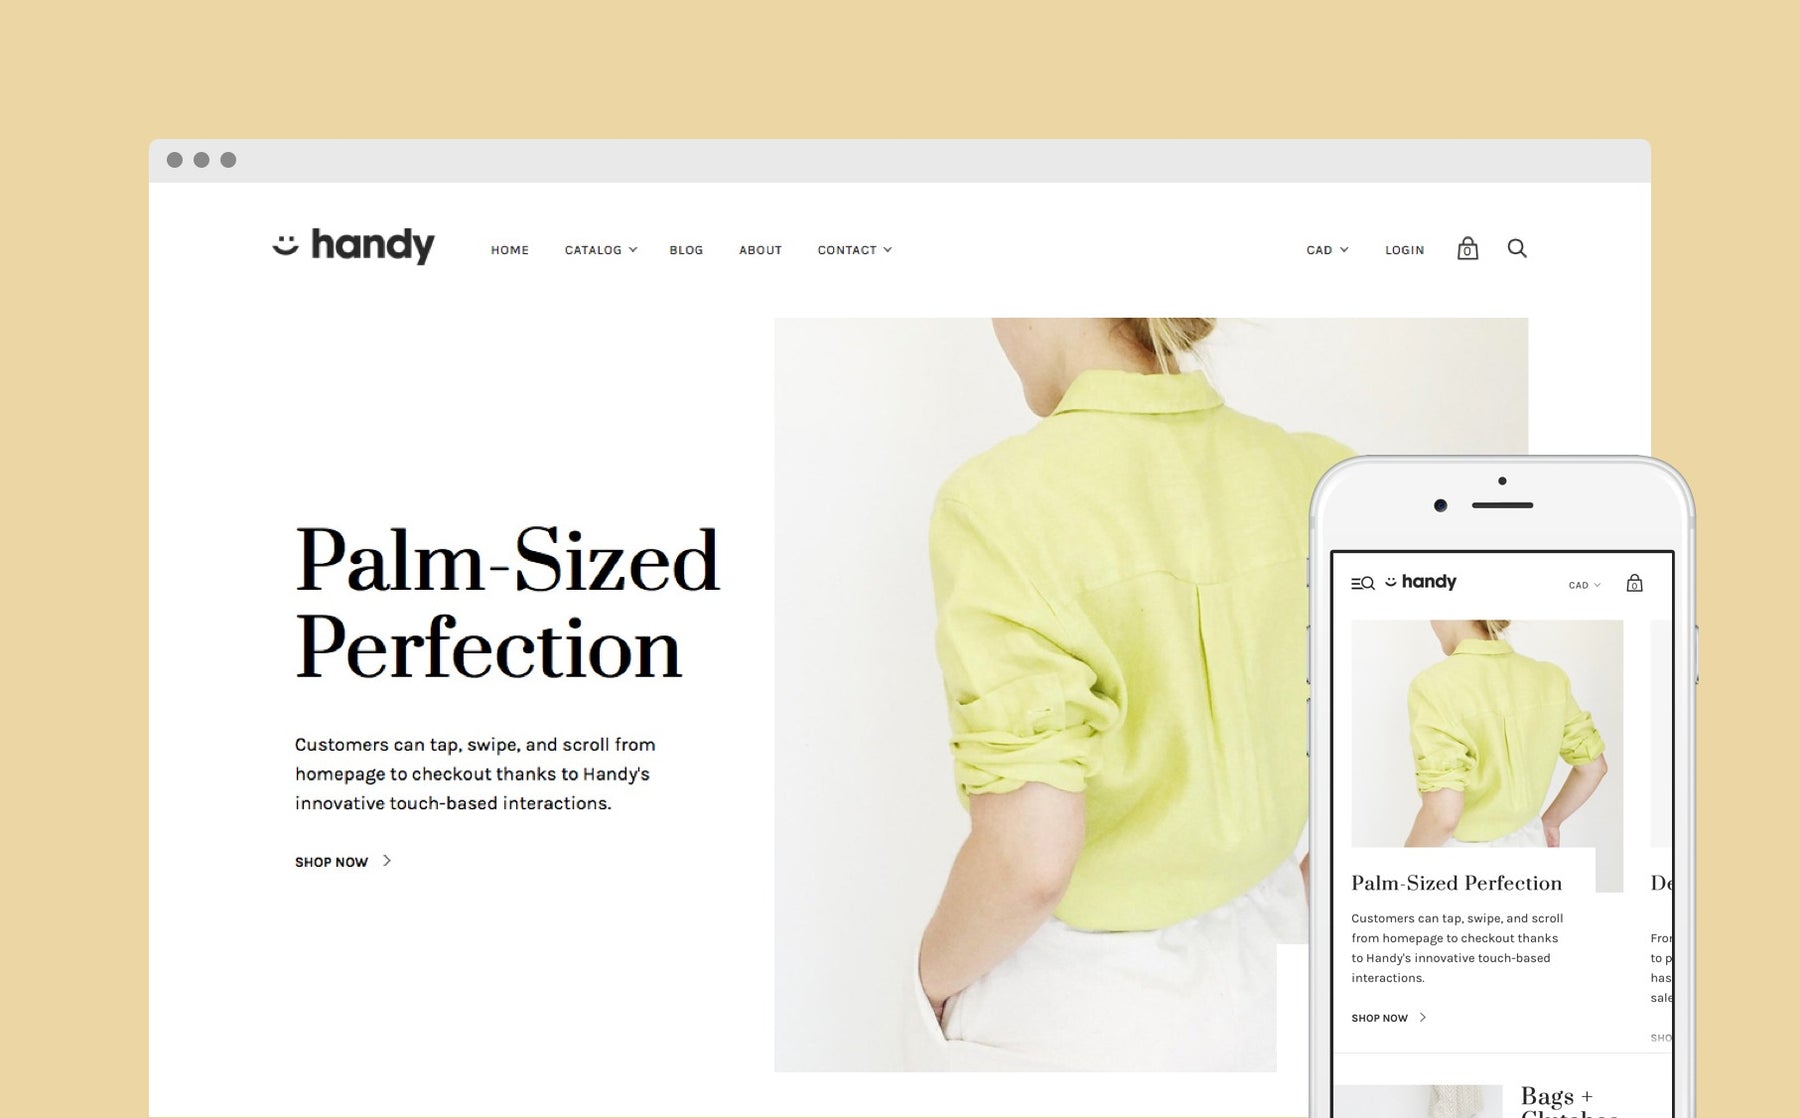 Introducing Handy, a powerful, mobile-first Shopify theme